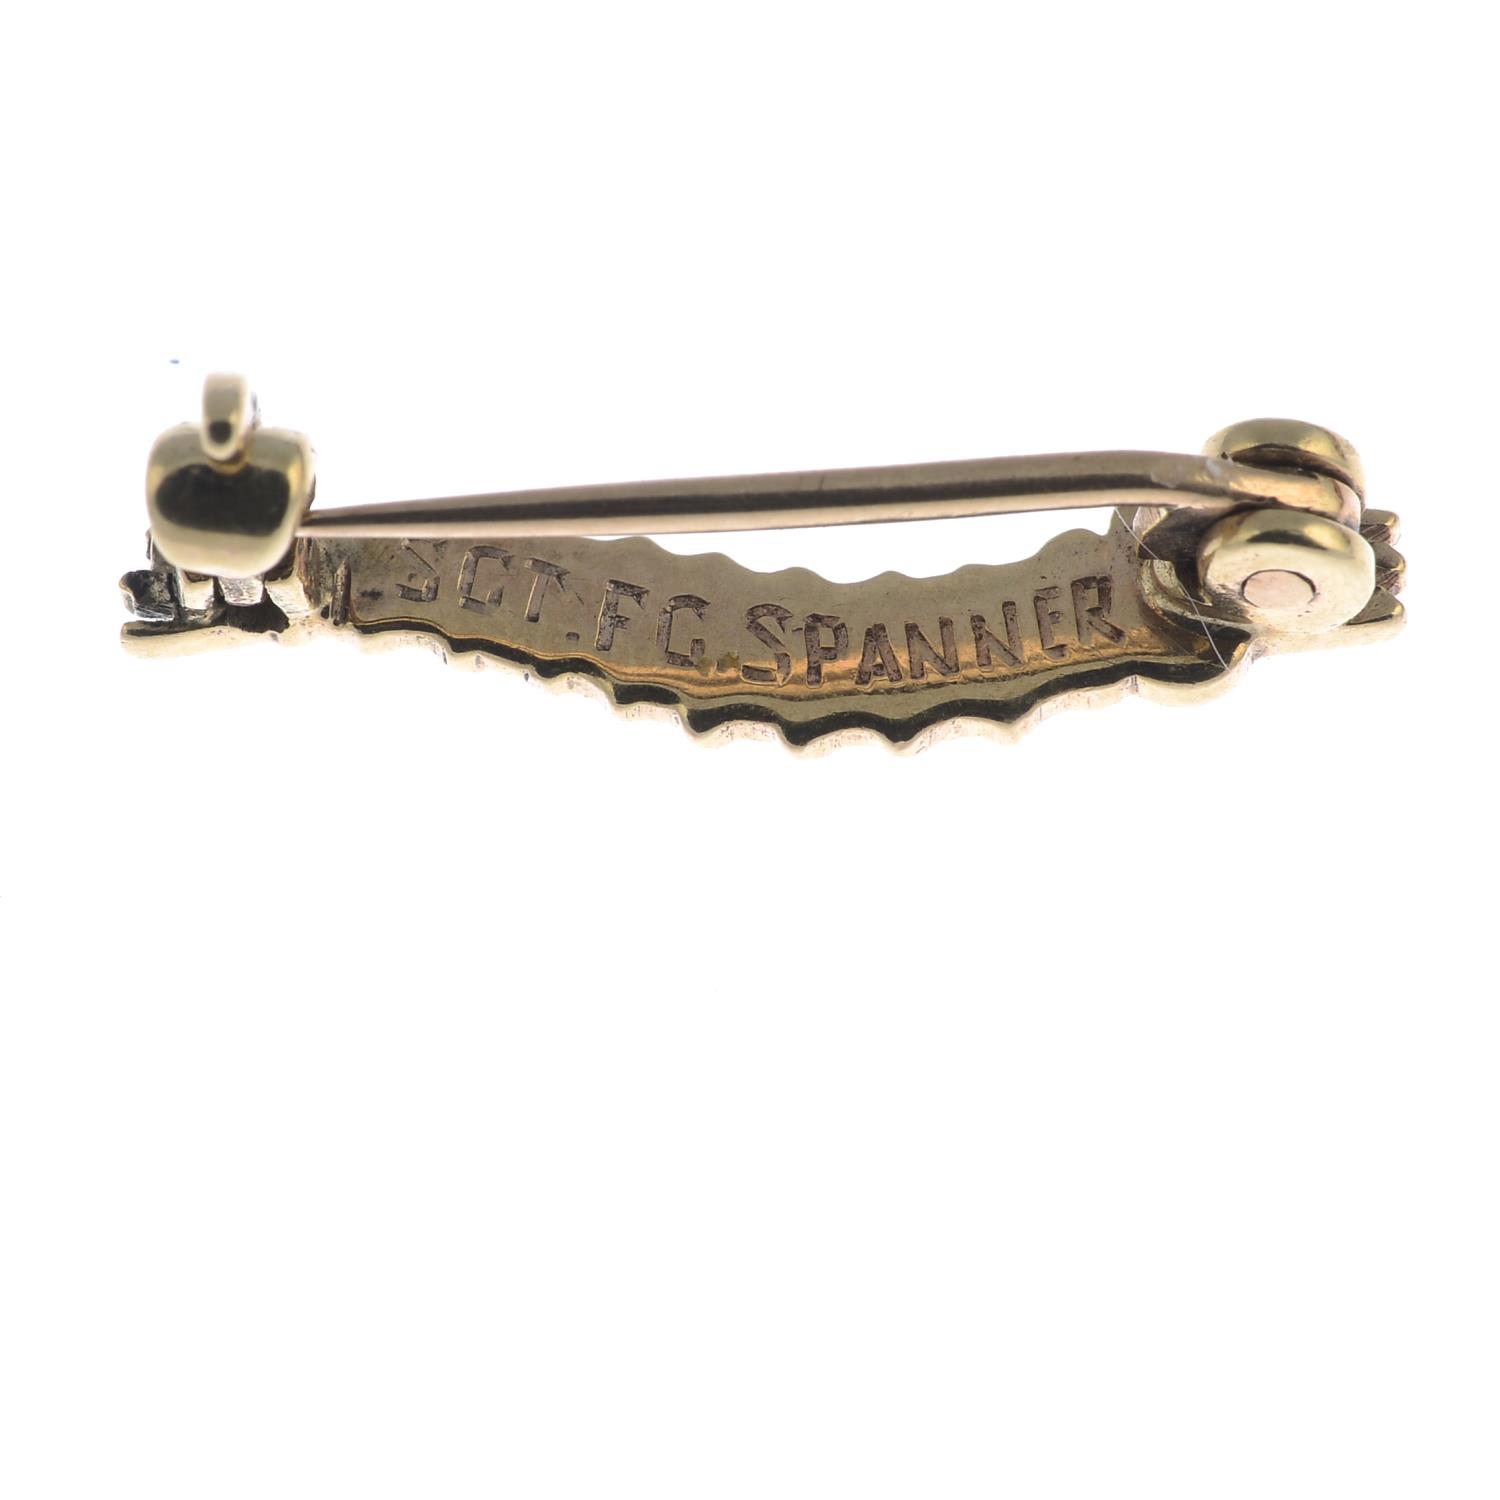 A gold 'caterpillar club' brooch. - Image 2 of 2